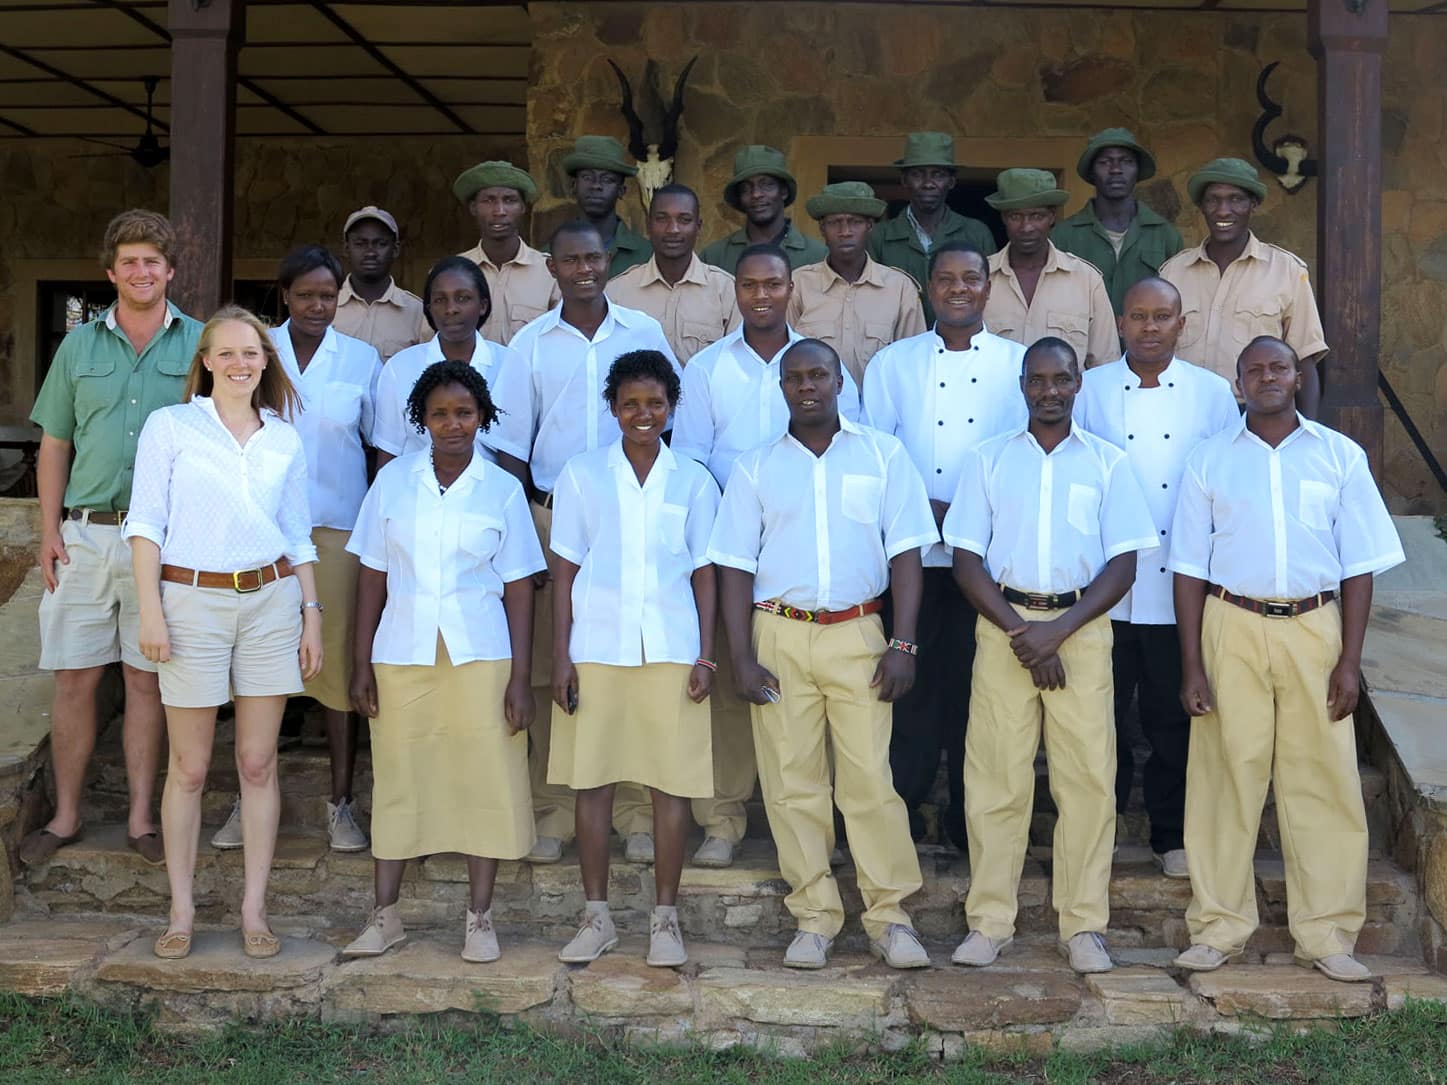 The Sosian team photo of some of the Guides, Chefs and Security staff